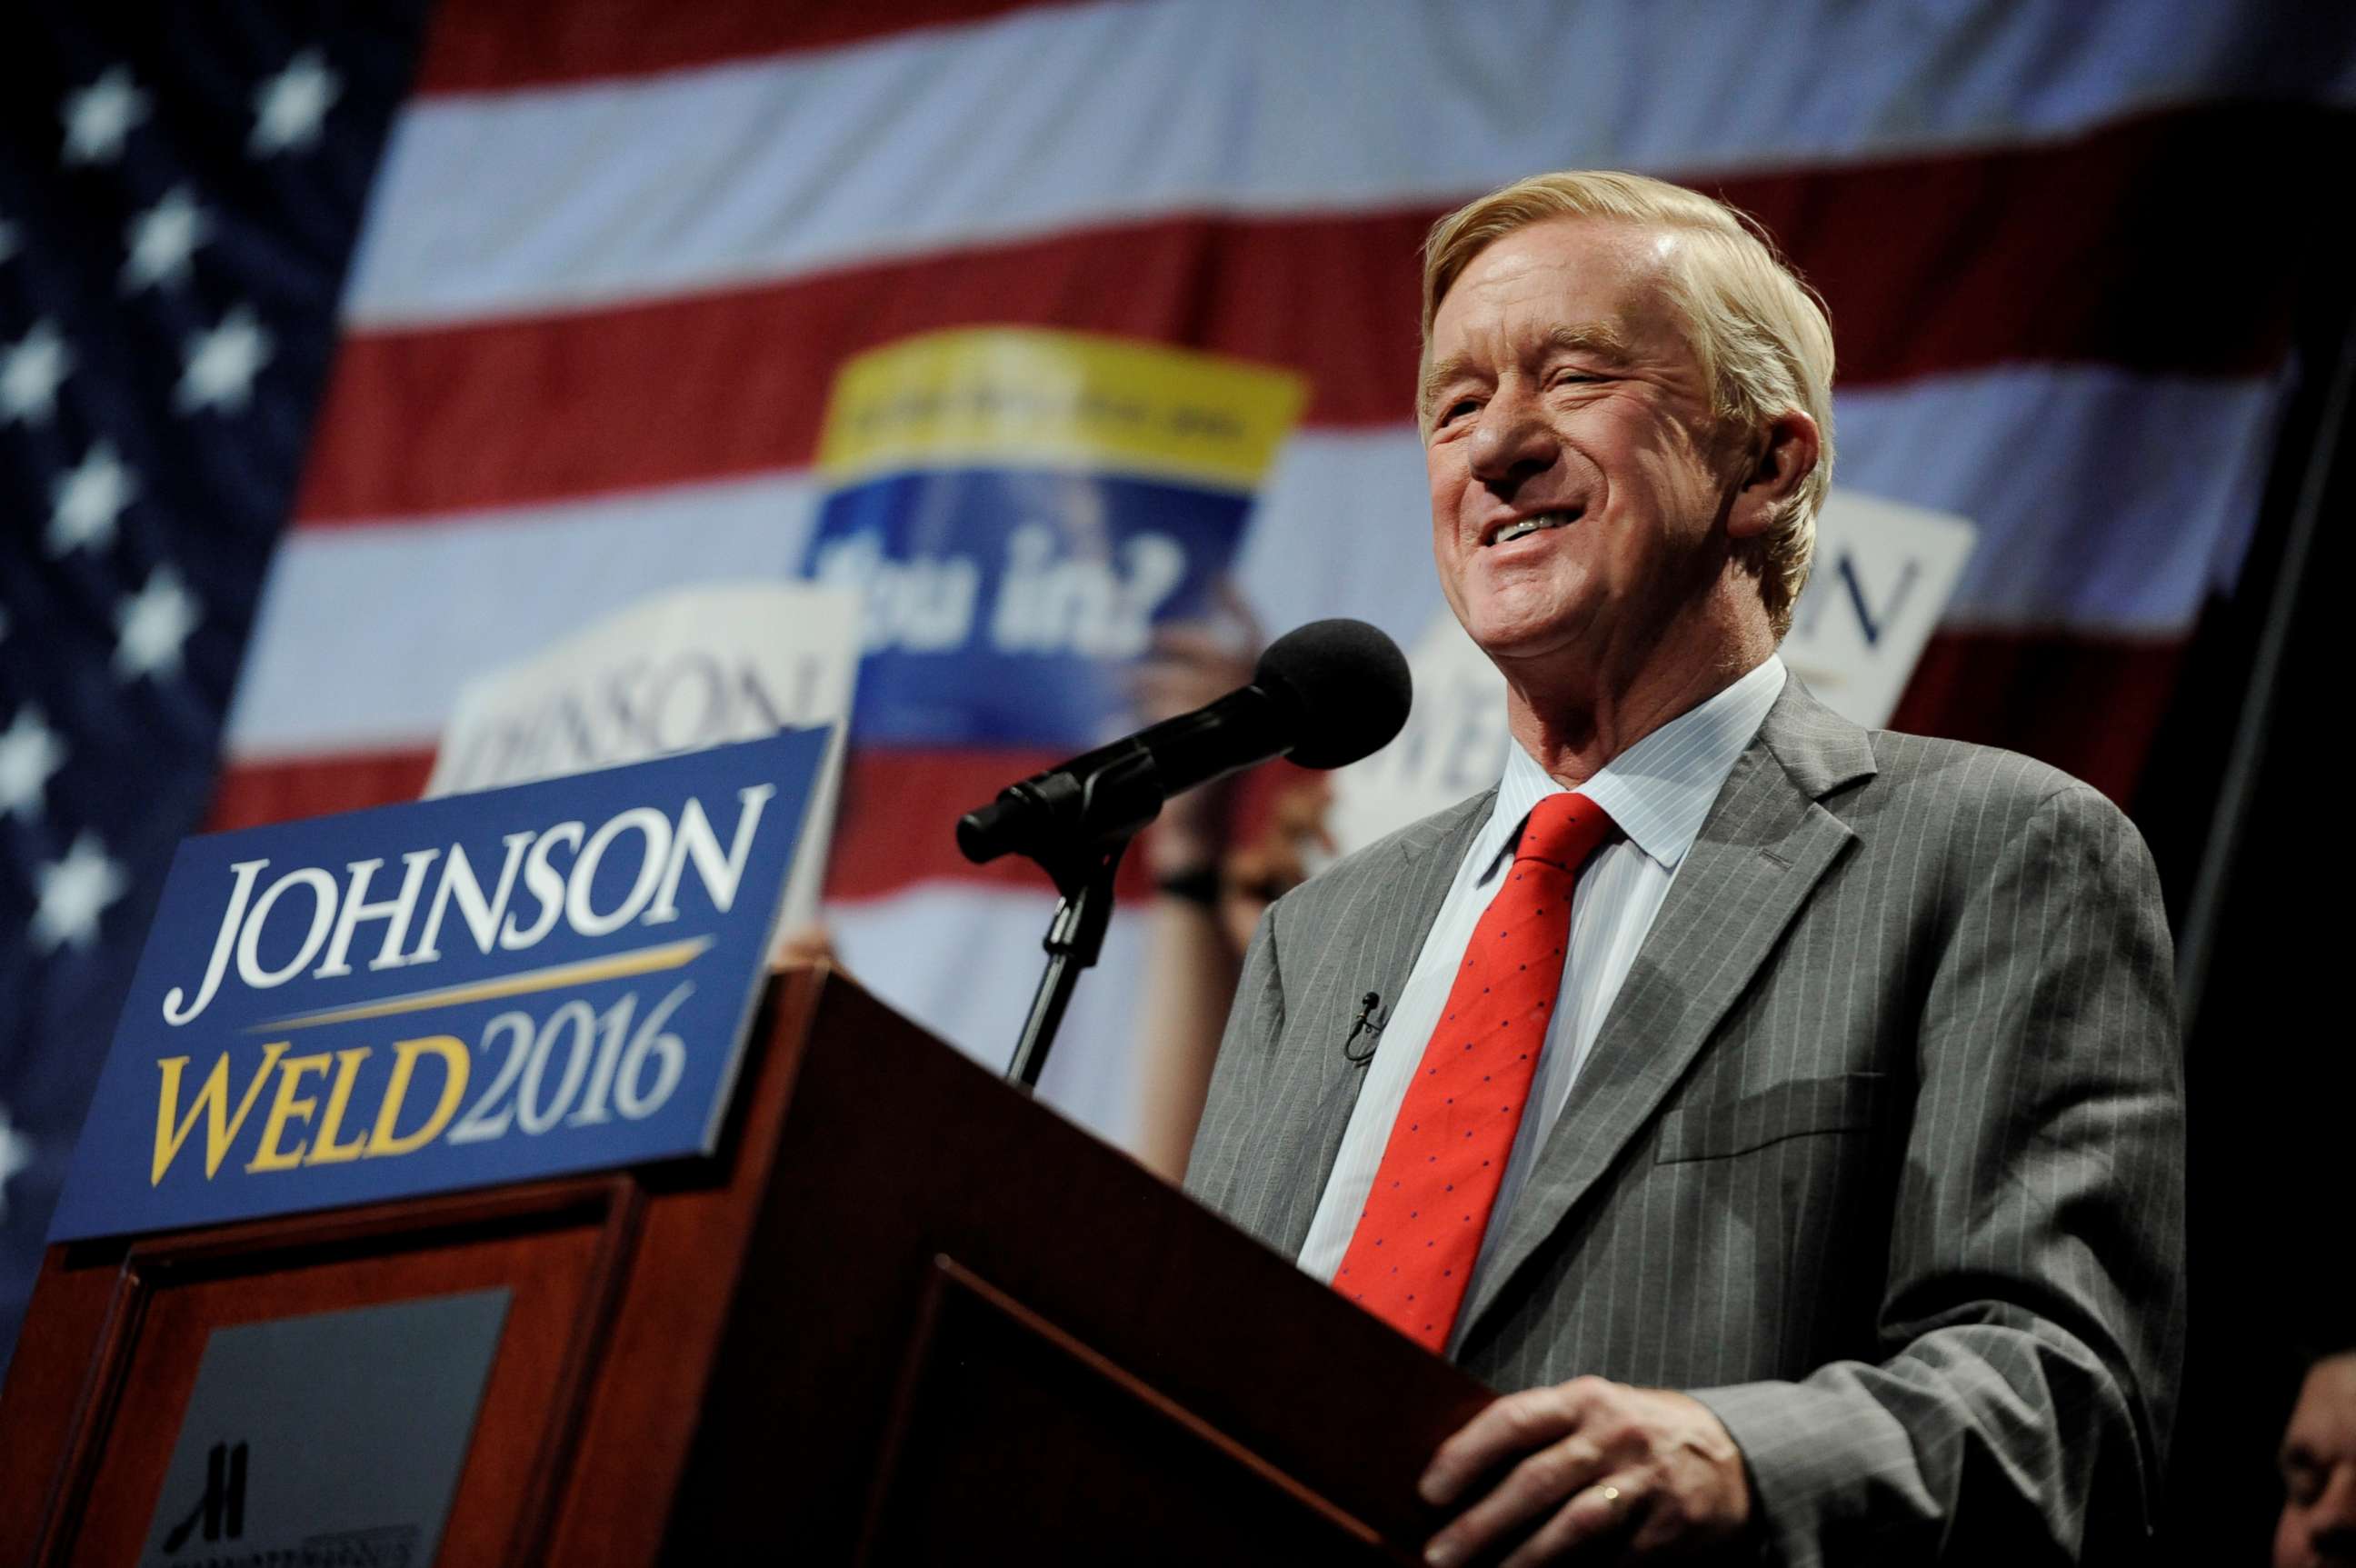 PHOTO: Libertarian vice presidential candidate Bill Weld speaks at a rally in New York, on Sept. 10, 2016.  